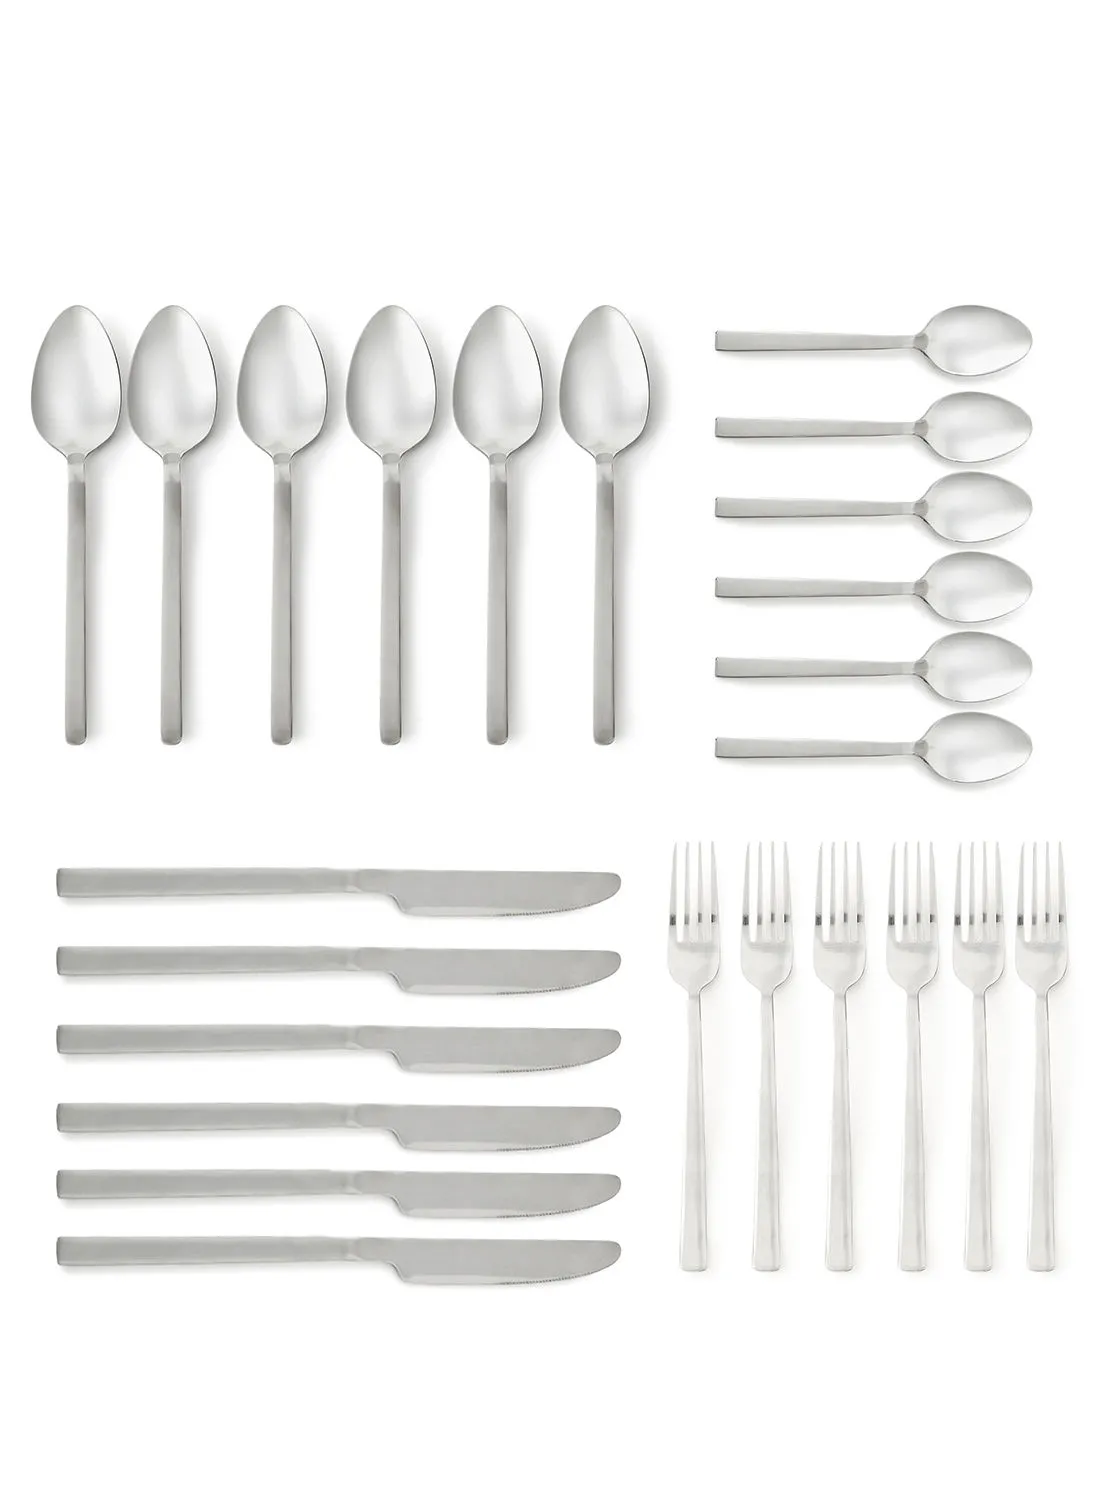 noon east 24 Piece Cutlery Set - Made Of Stainless Steel - Silverware Flatware - Spoons And Forks Set, Spoon Set - Table Spoons, Tea Spoons, Forks, Knives - Serves 6 - Design Silver Antila